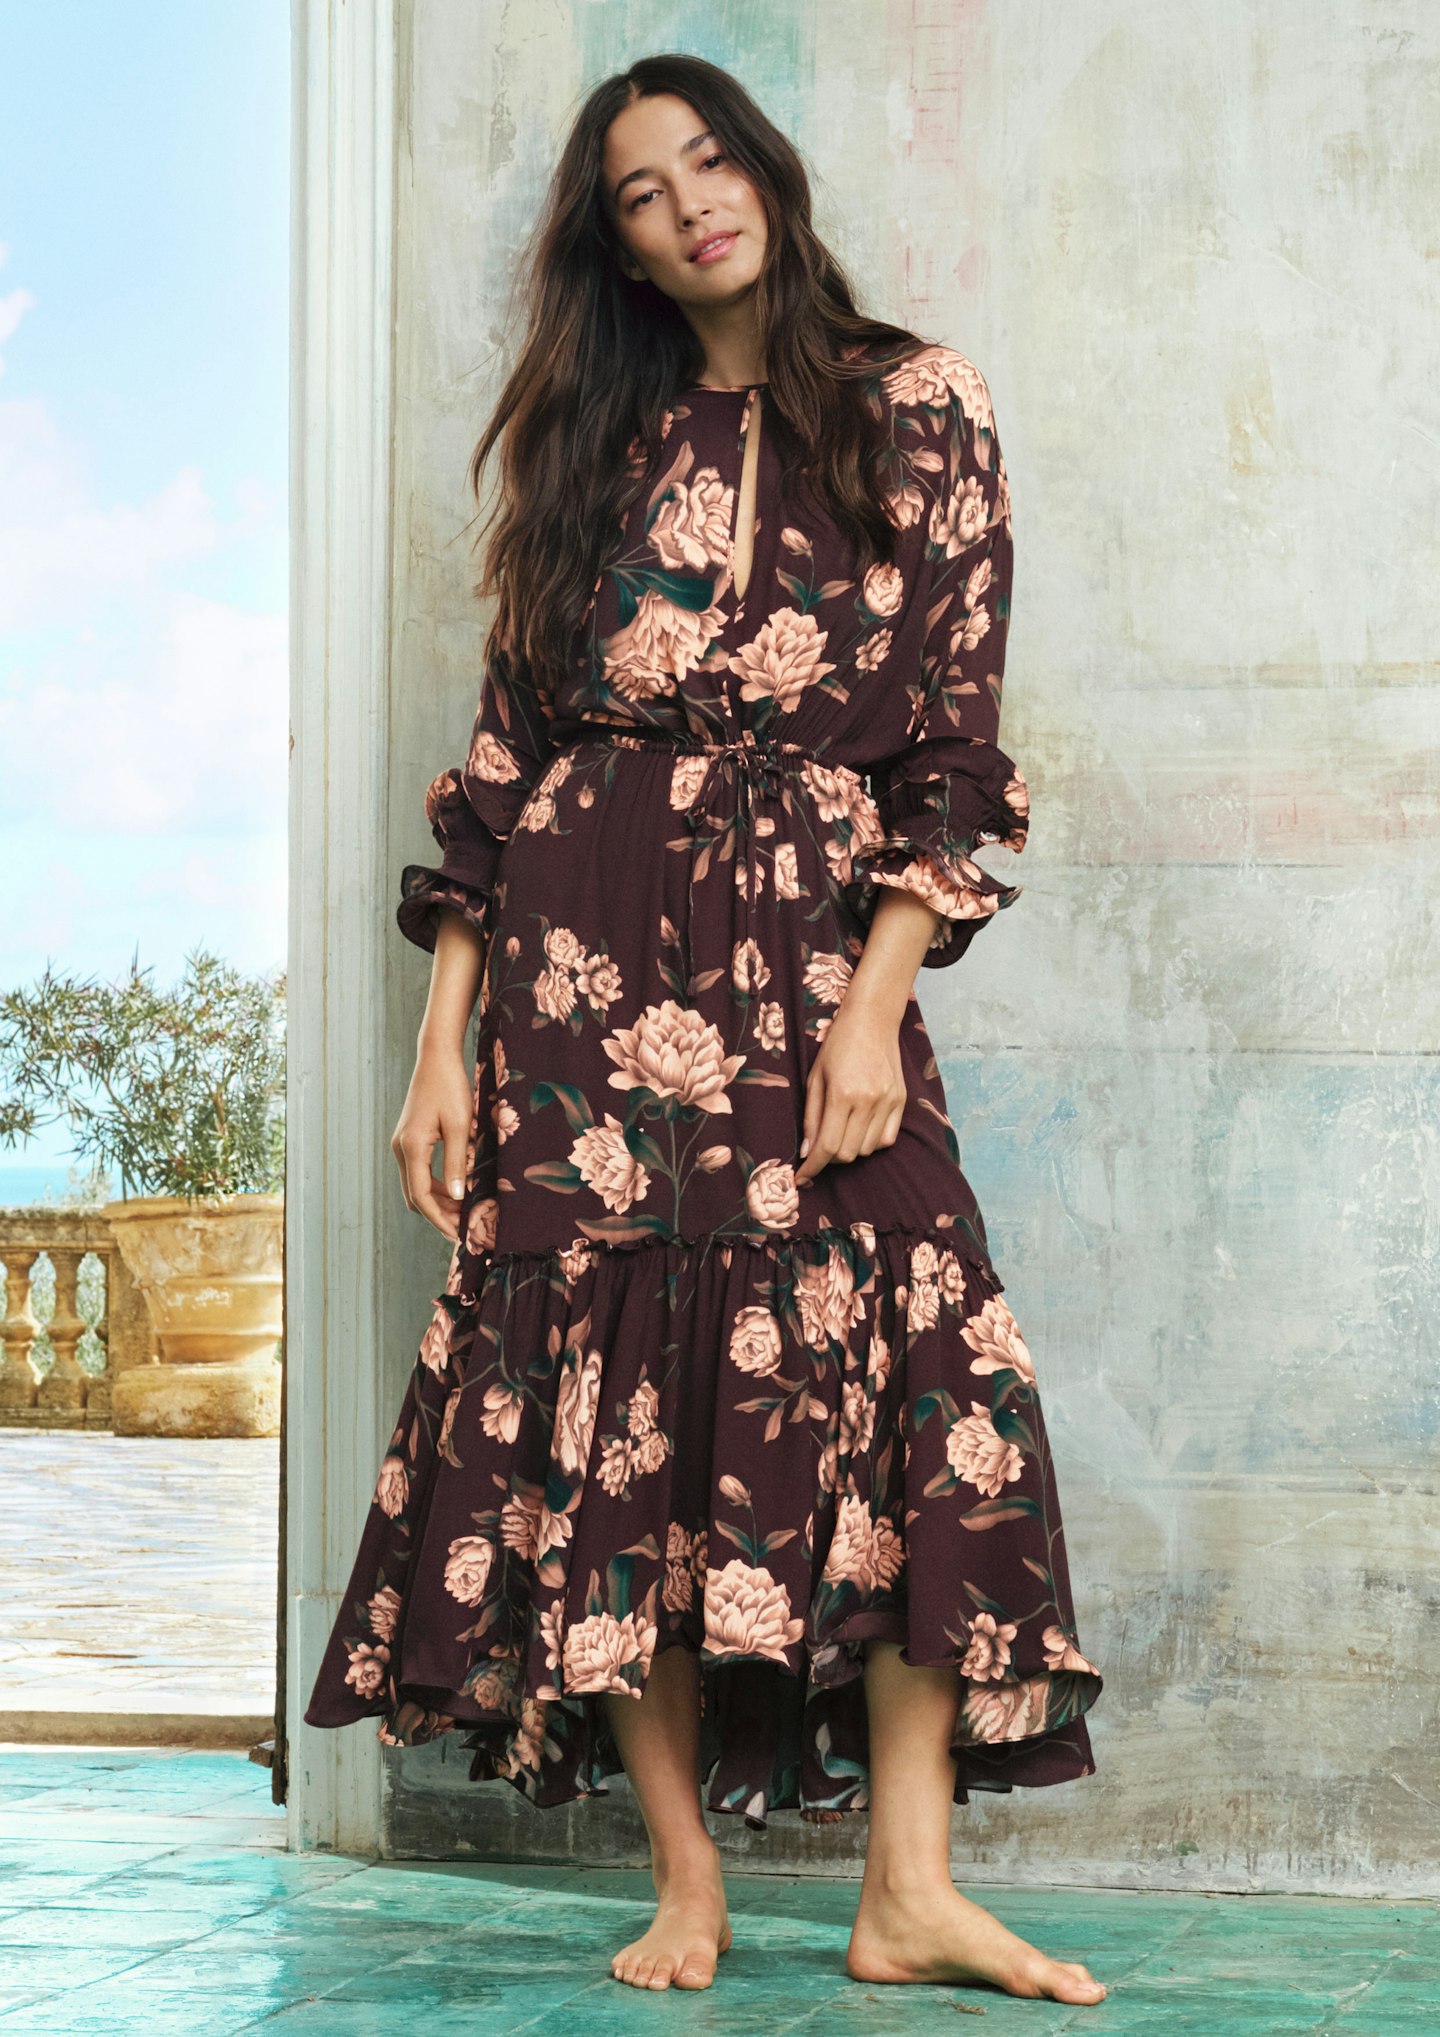 Jessica Gomes wearing a dress from the H&M collection